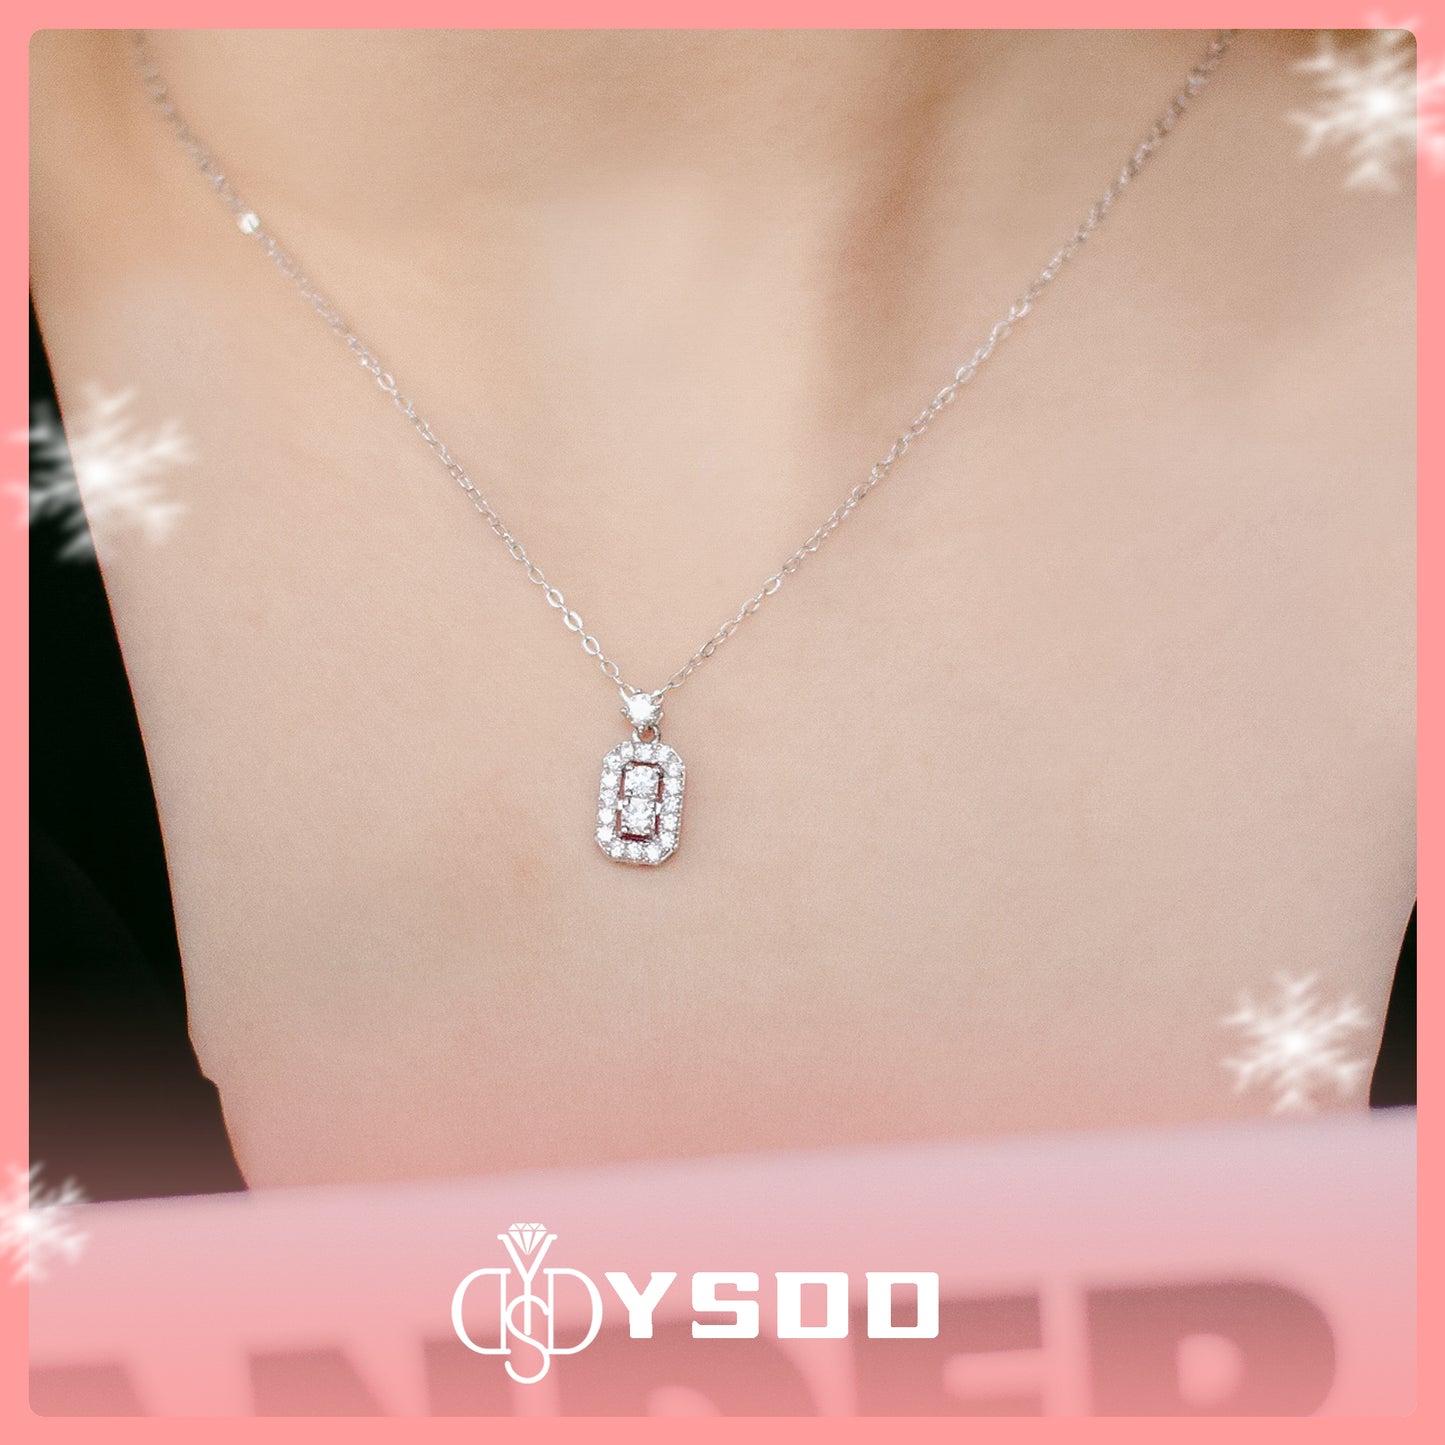 【#209 Business Casual】Regal Moissanite Pendant Necklace in s925